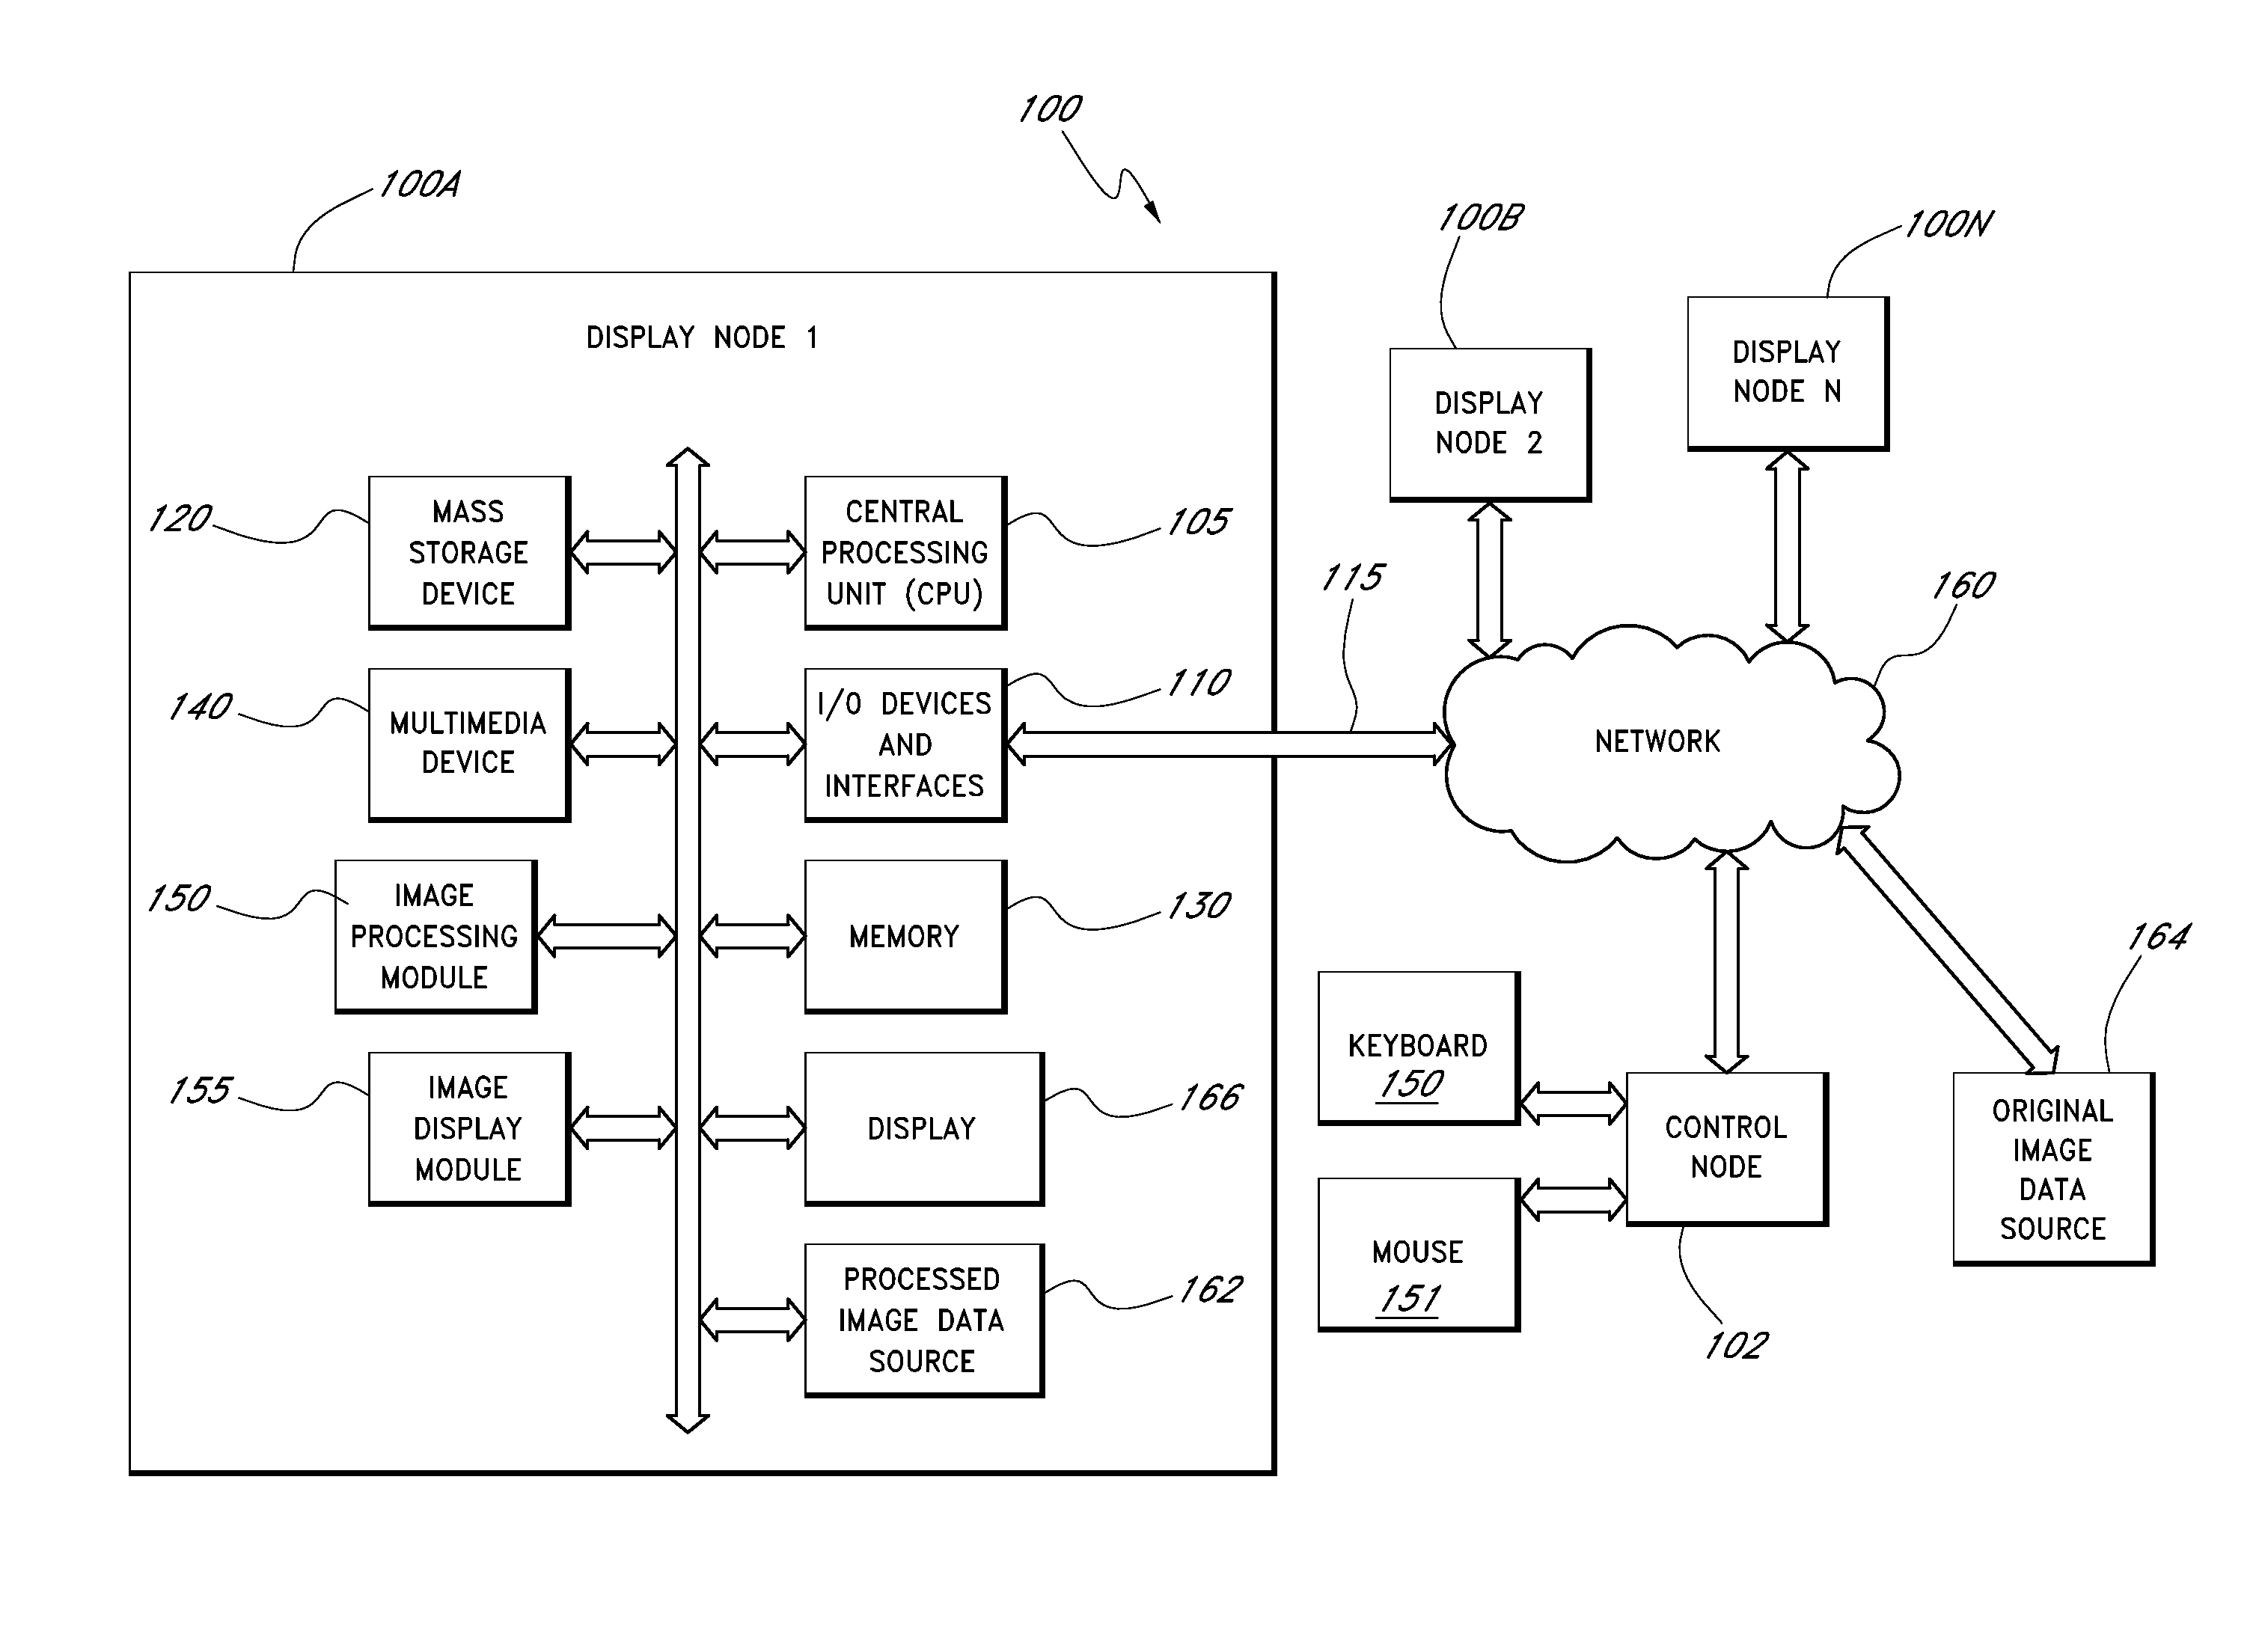 Systems, methods, and devices for manipulation of images on tiled displays